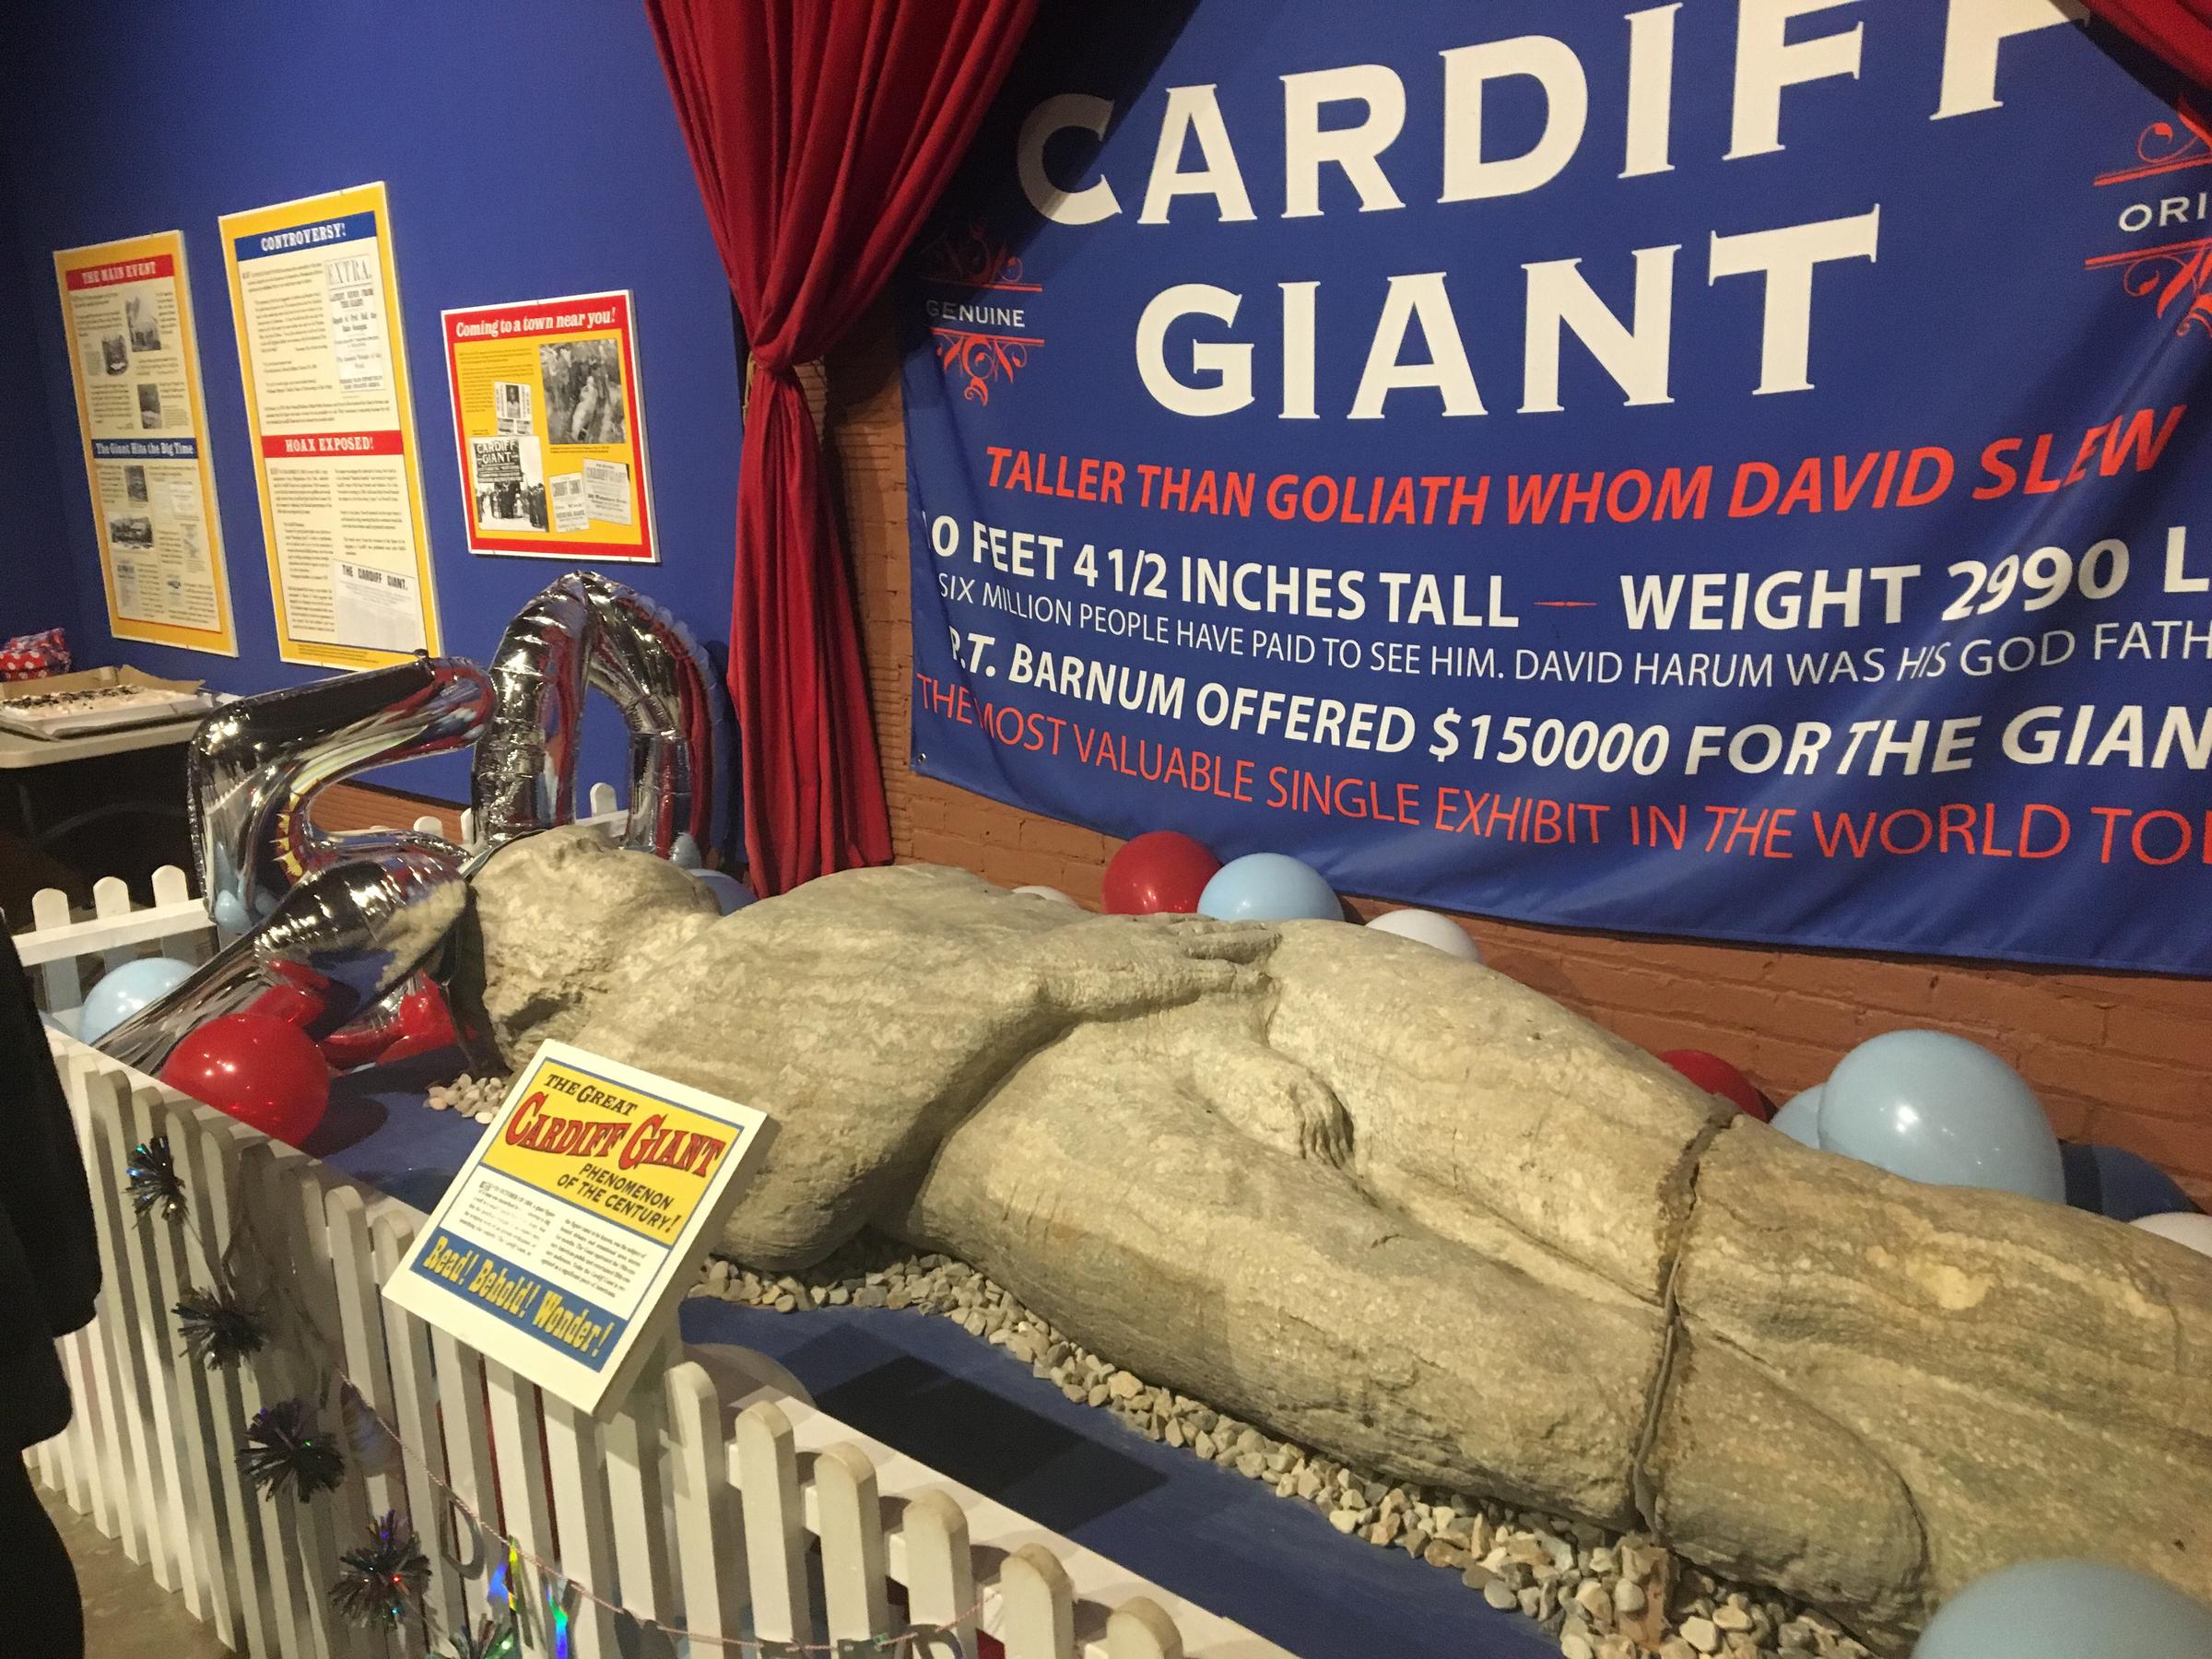 Cardiff Giant Celebrates 150th Birthday | A New York Minute In History